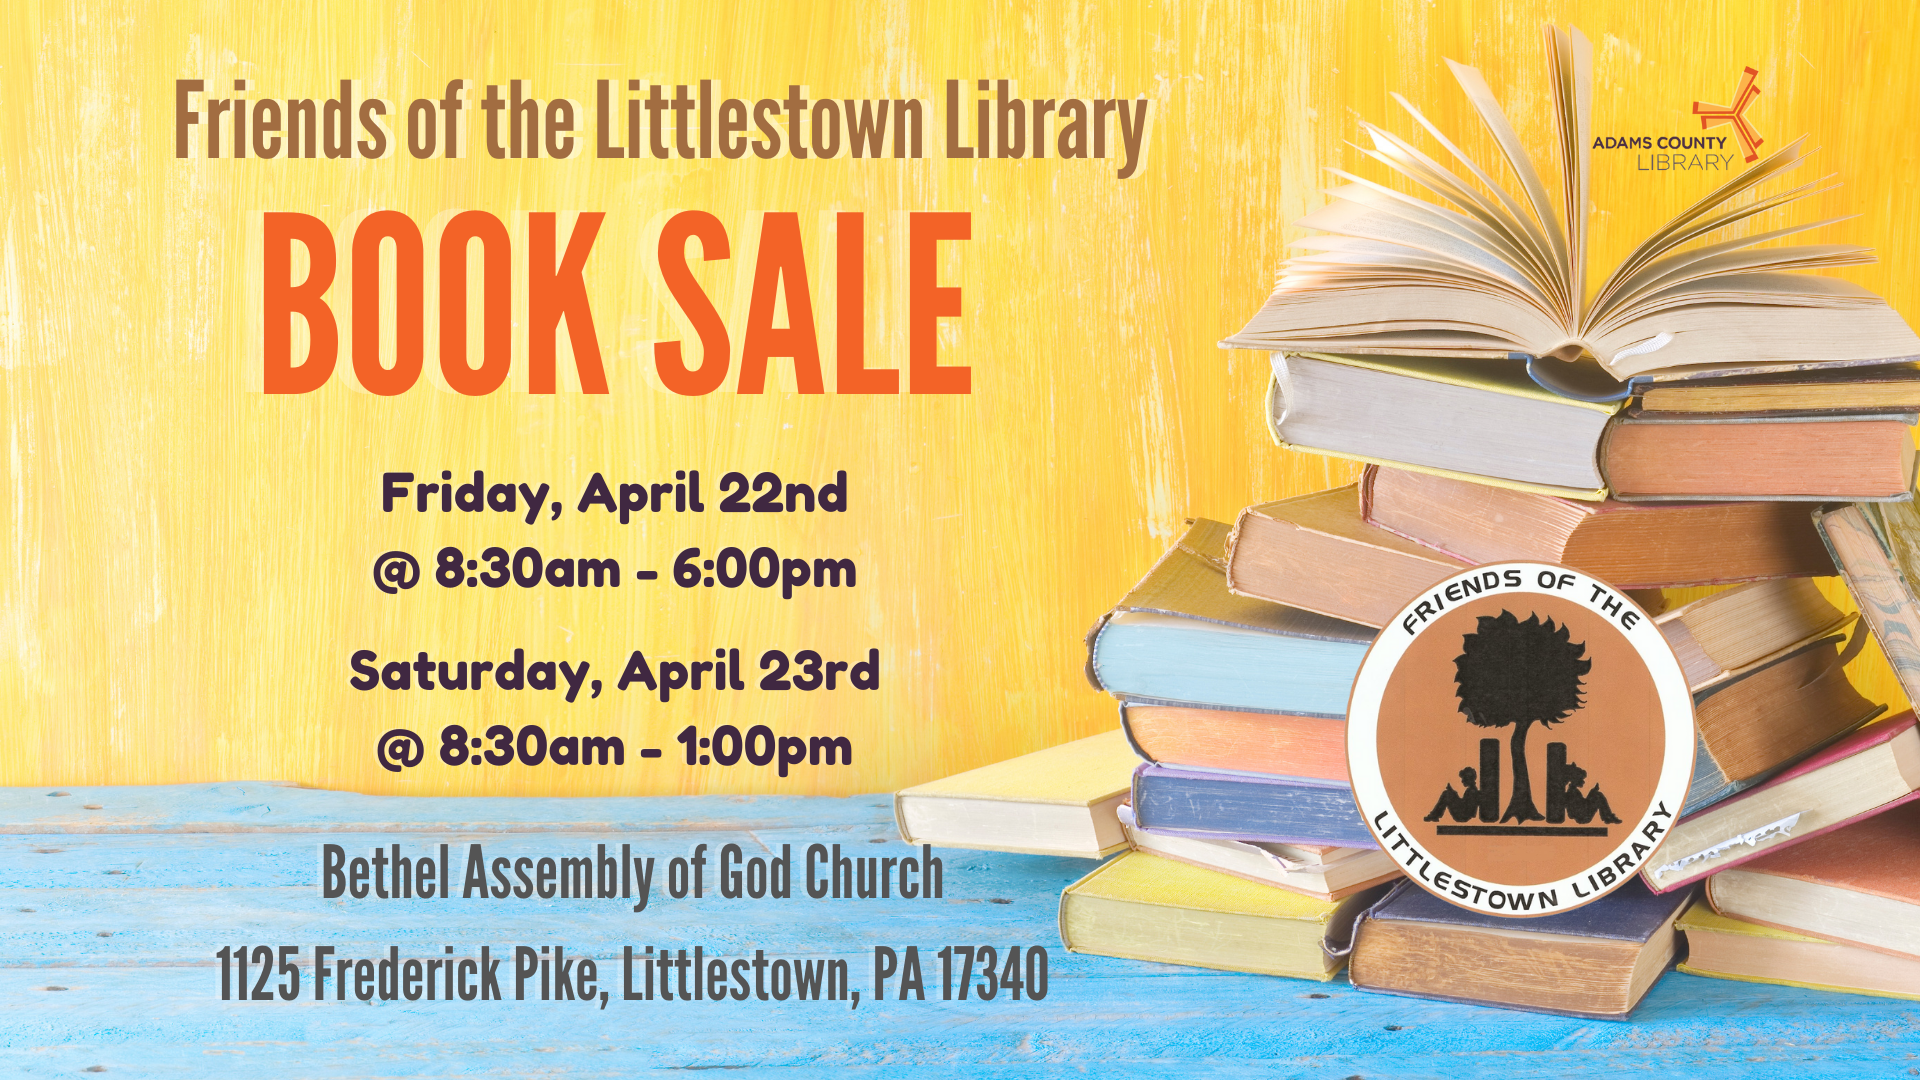 Friends of the Littlestown Library Book Sale at the Bethel Assembly of God Church on Friday, April 22nd and Saturday, April 23rd.